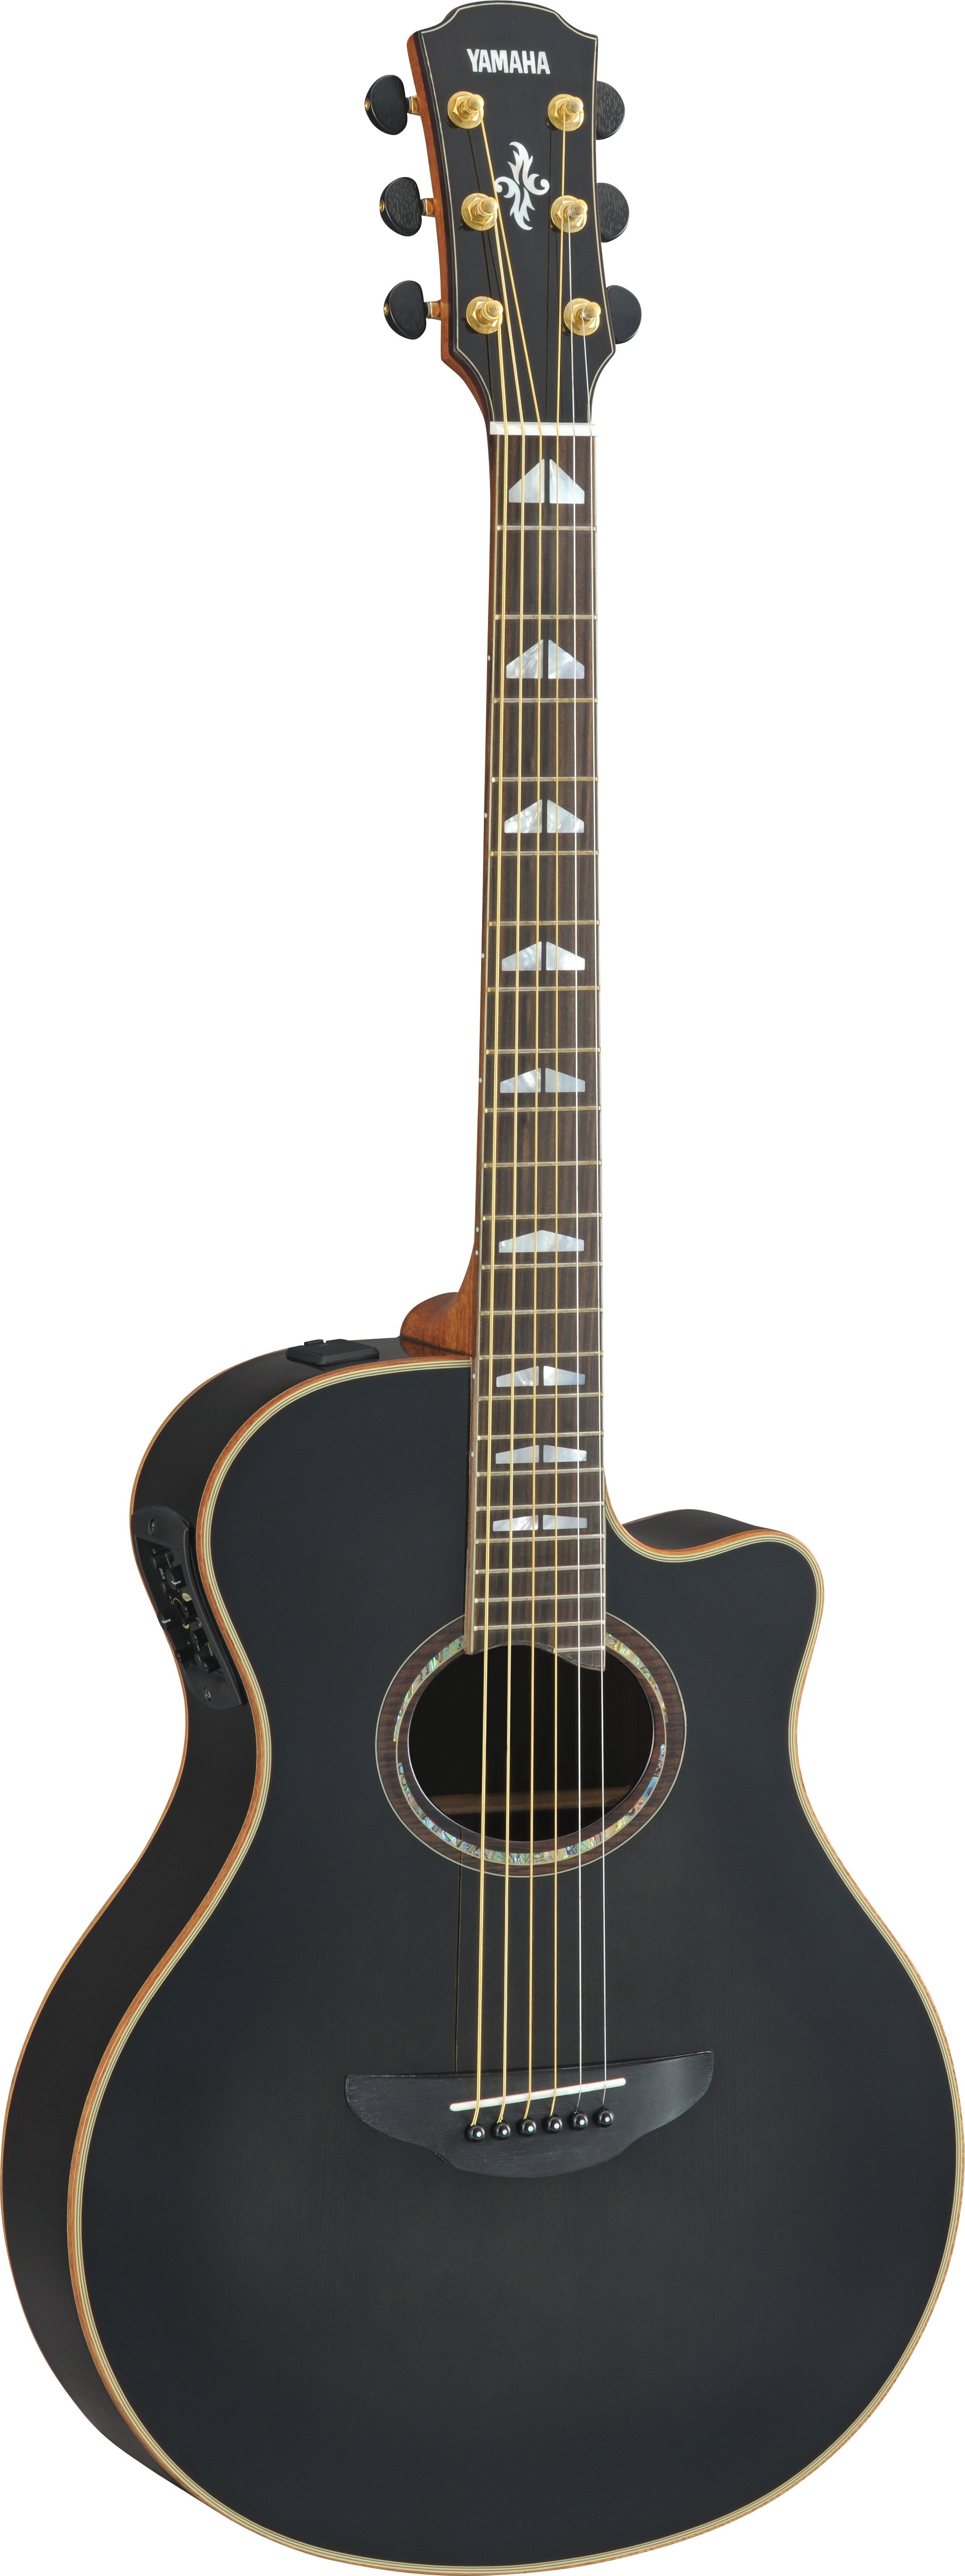 Yamaha APX600 BL Thin Body Acoustic-Electric Guitar, Black